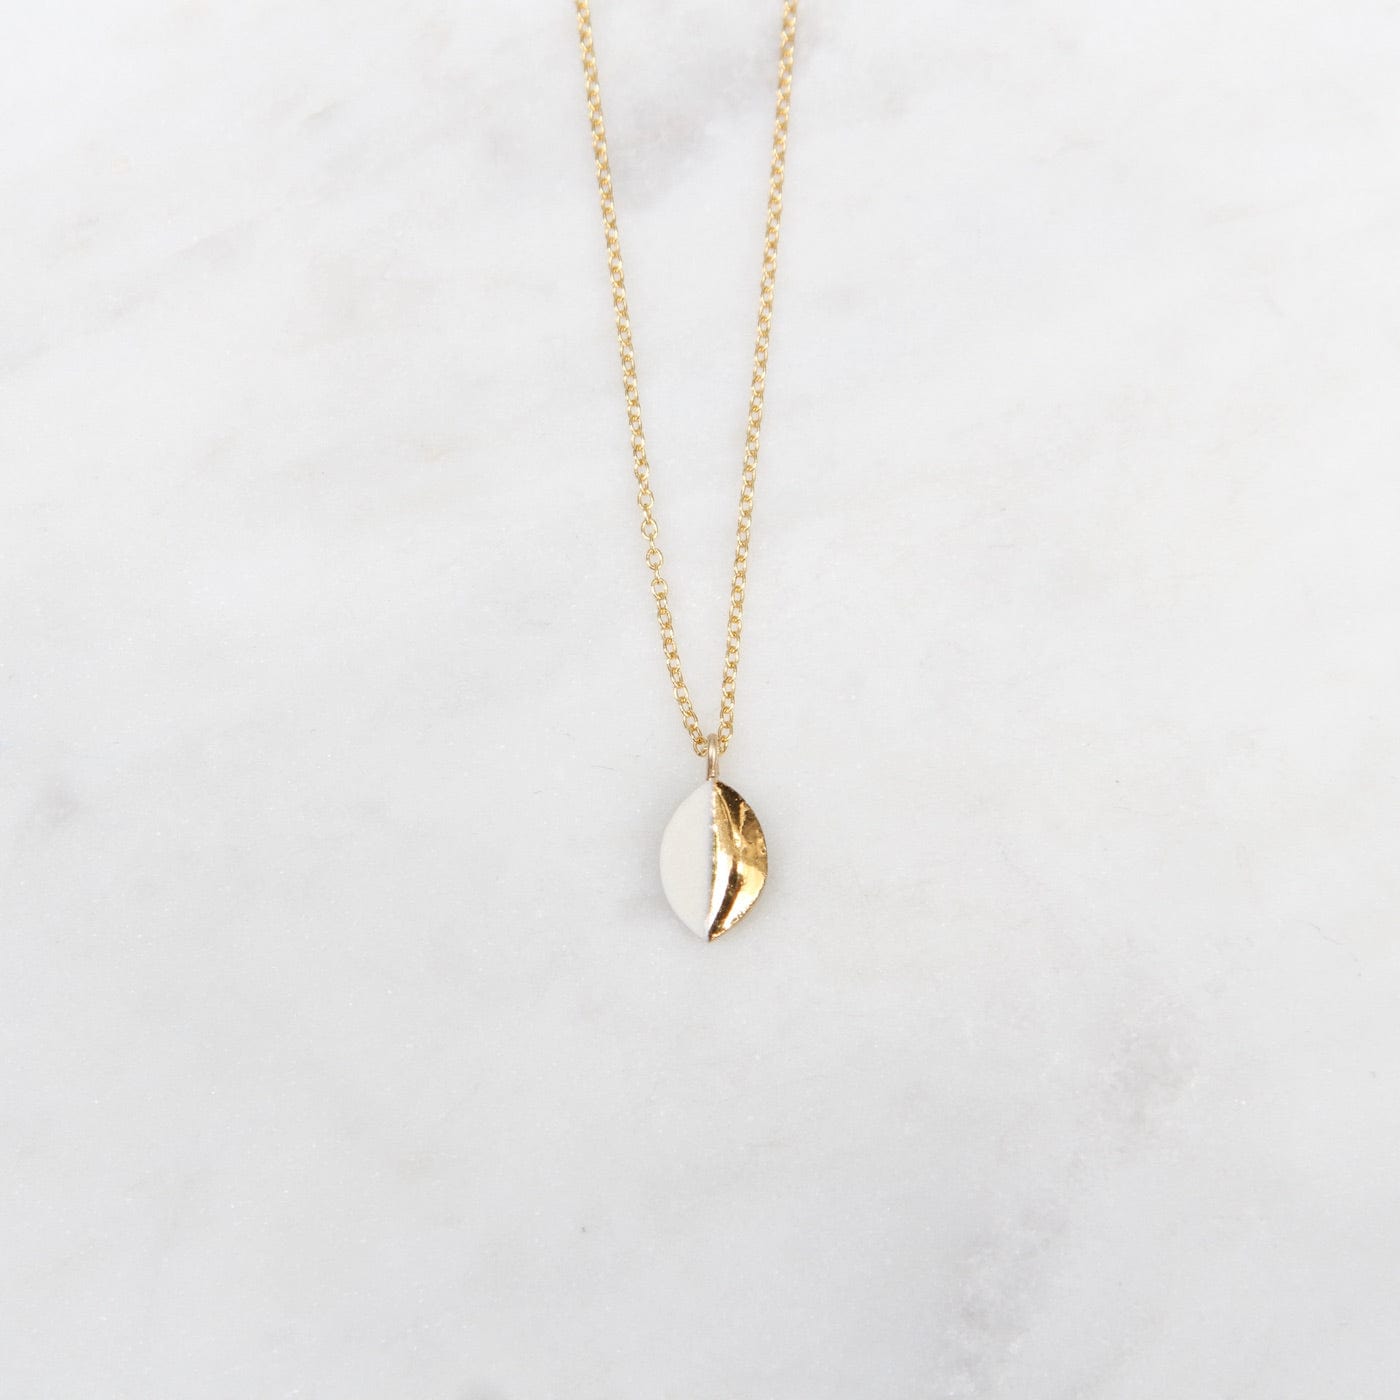 NKL-GF White Gold Dipped Mini Marquise Necklace